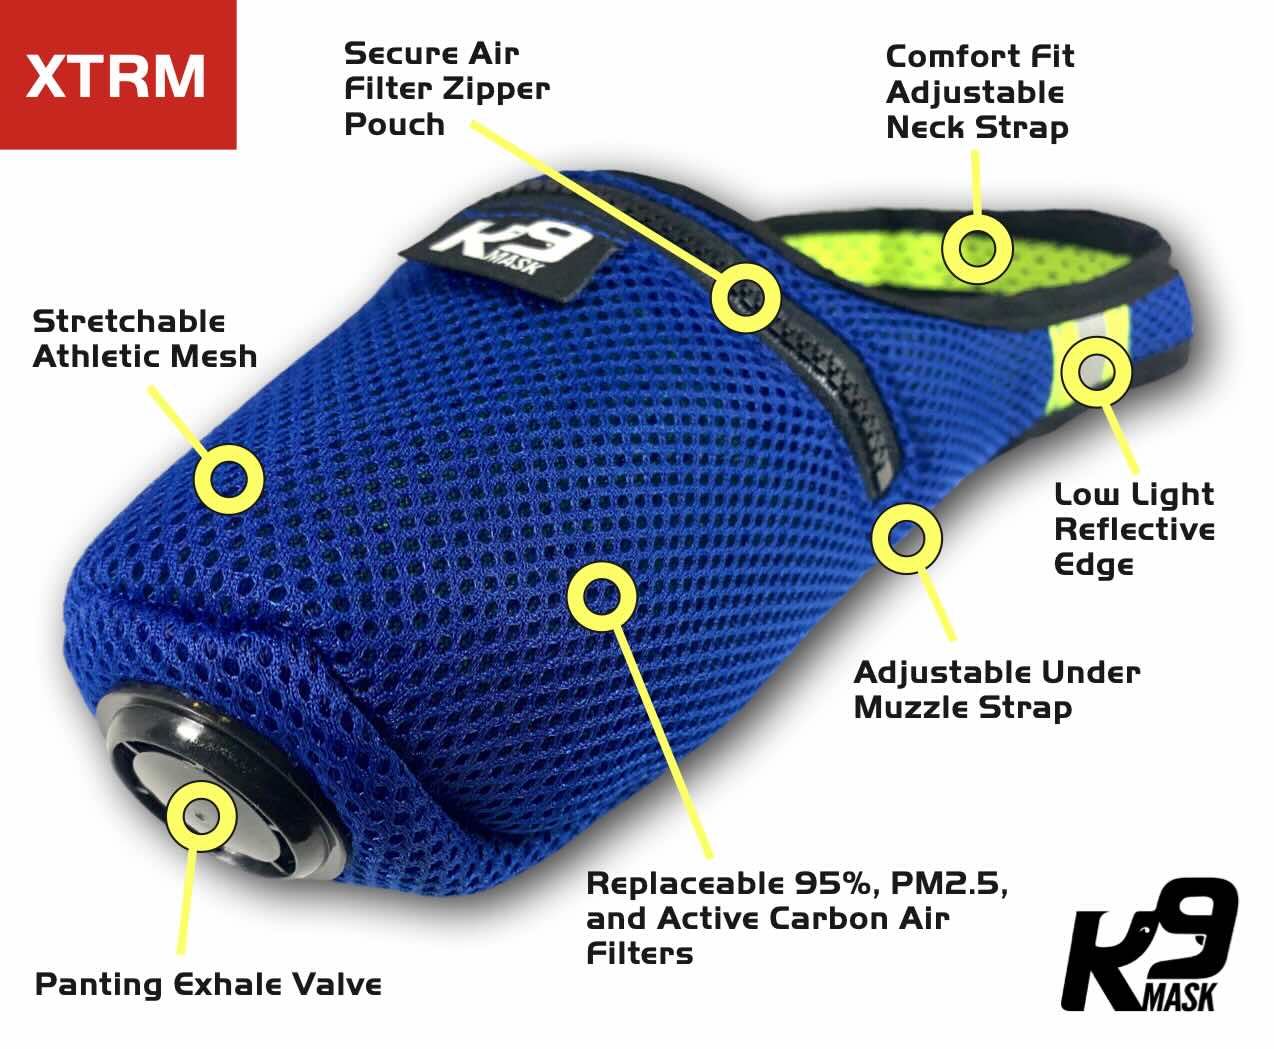 K9 Mask® Extreme Breathe Benefits and Features in Dog Air Filter Mask Pm2.5 95